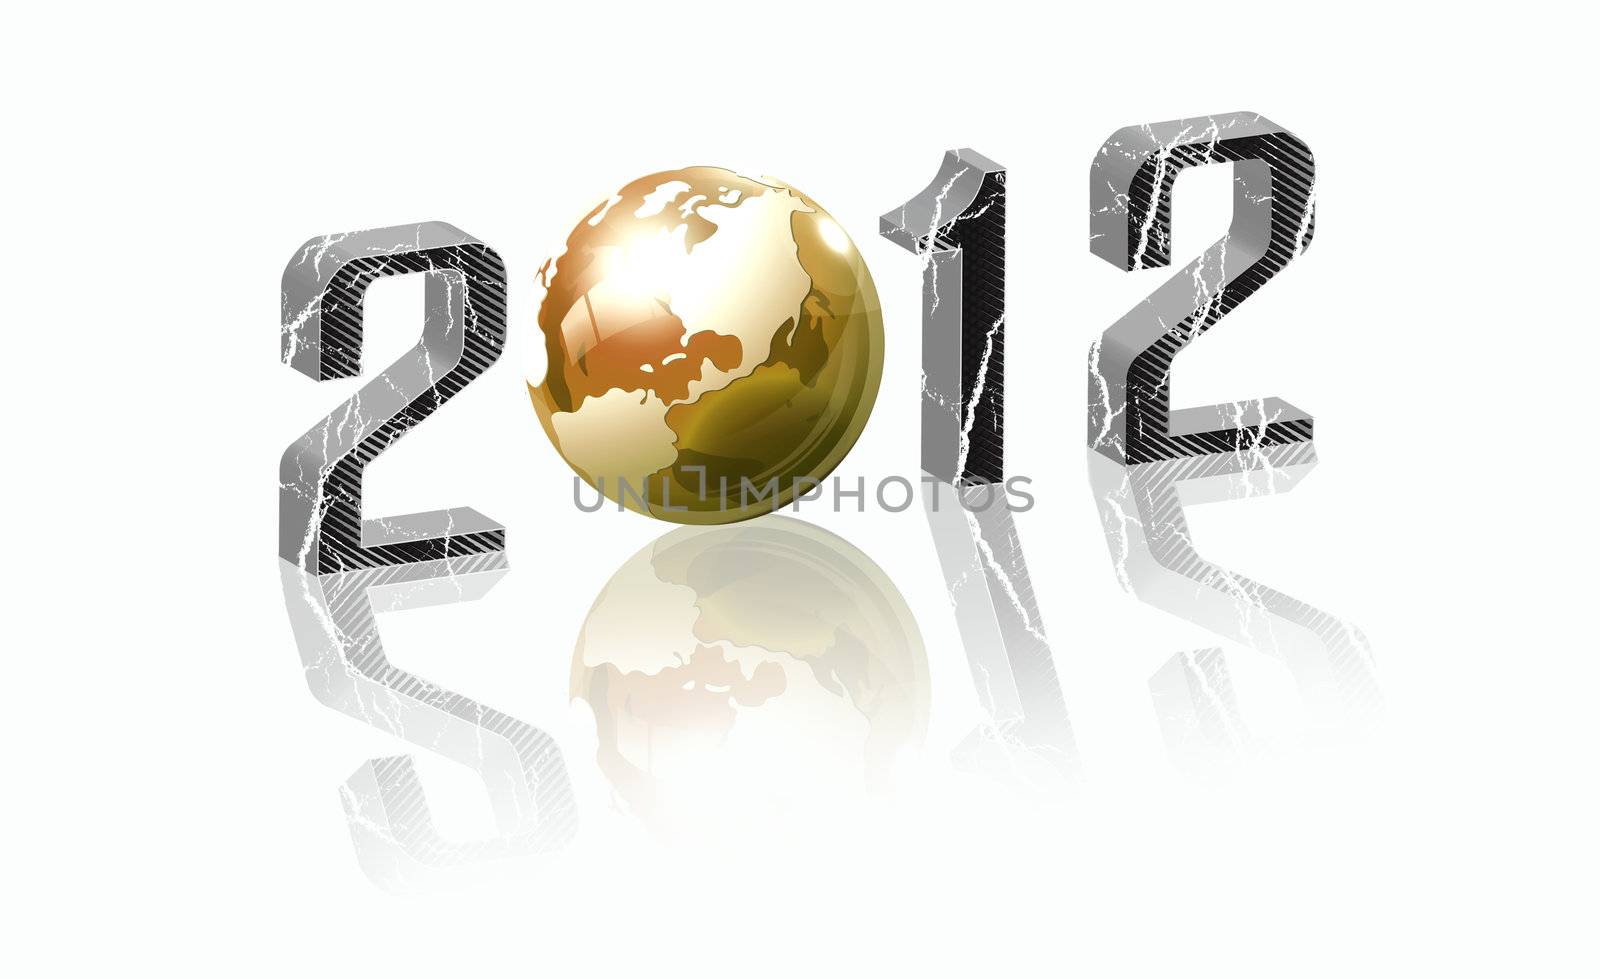 Creative 2012 New Year concept with blue Earth globe isolated